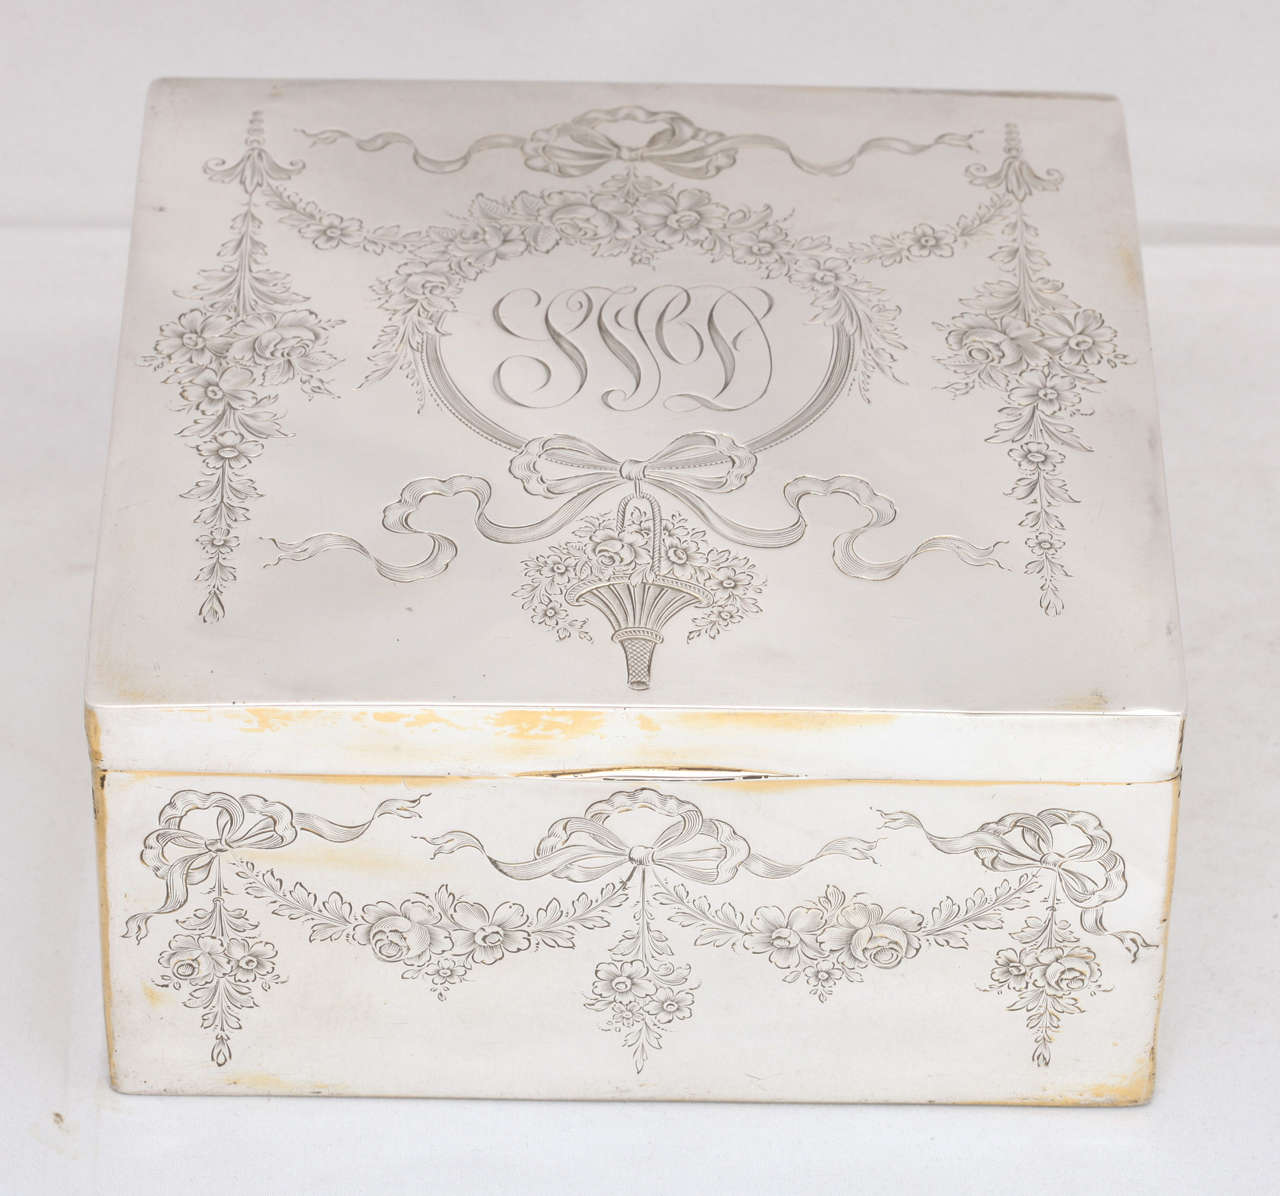 Large, sterling silver, hinged jewelry or table box, The Gorham Corp., Providence, Rhode Island, circa 1895. Beautifully etched with flower garlands, ribbons, bows and flower baskets. Cartouche is monogrammed (